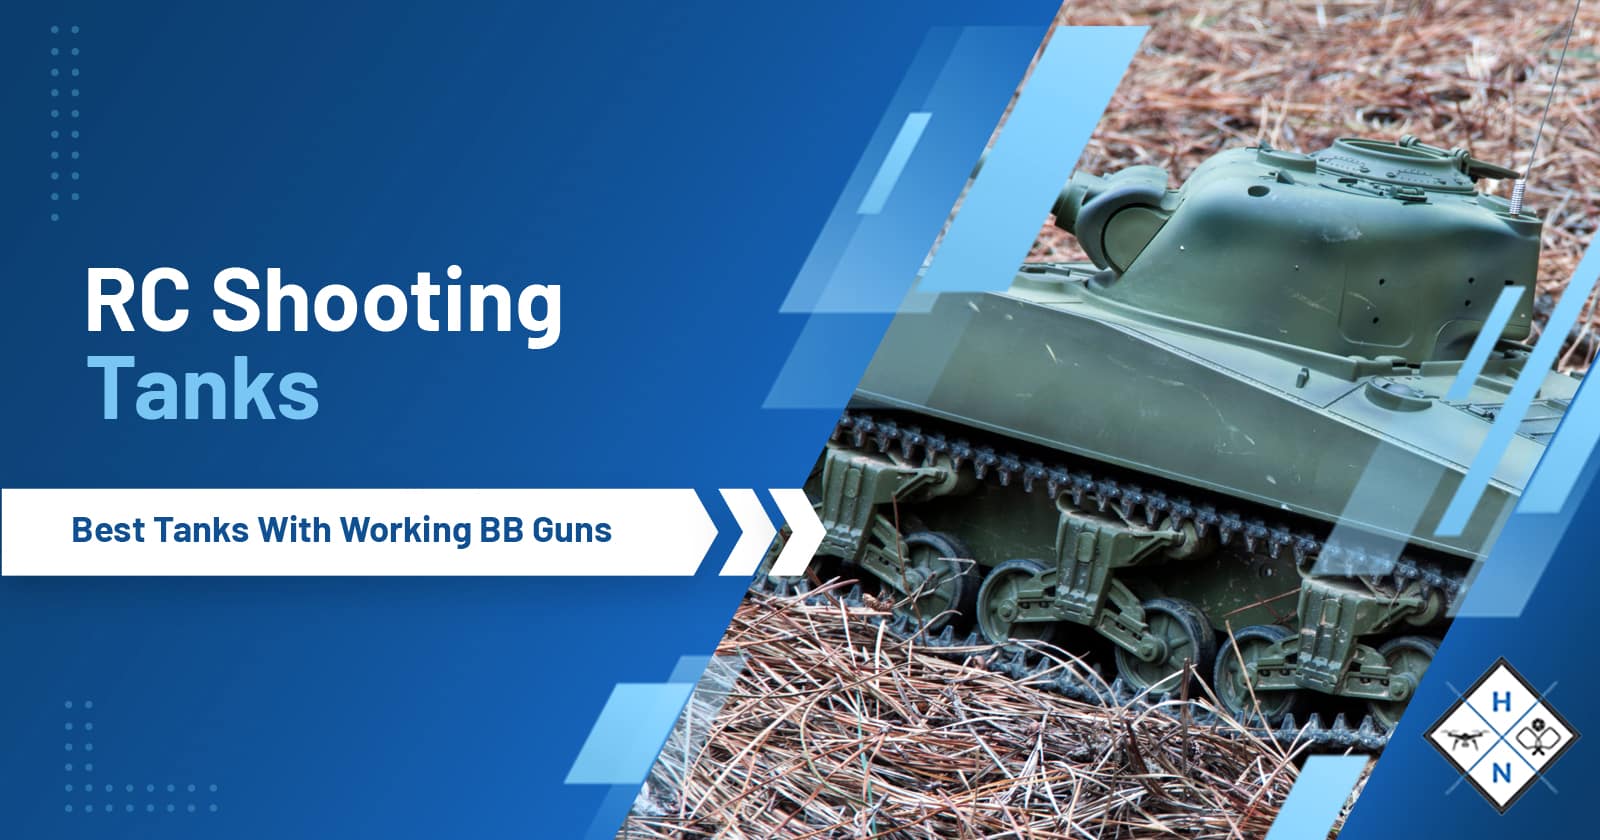 RC Shooting Tanks: Best Tanks With Working BB Guns